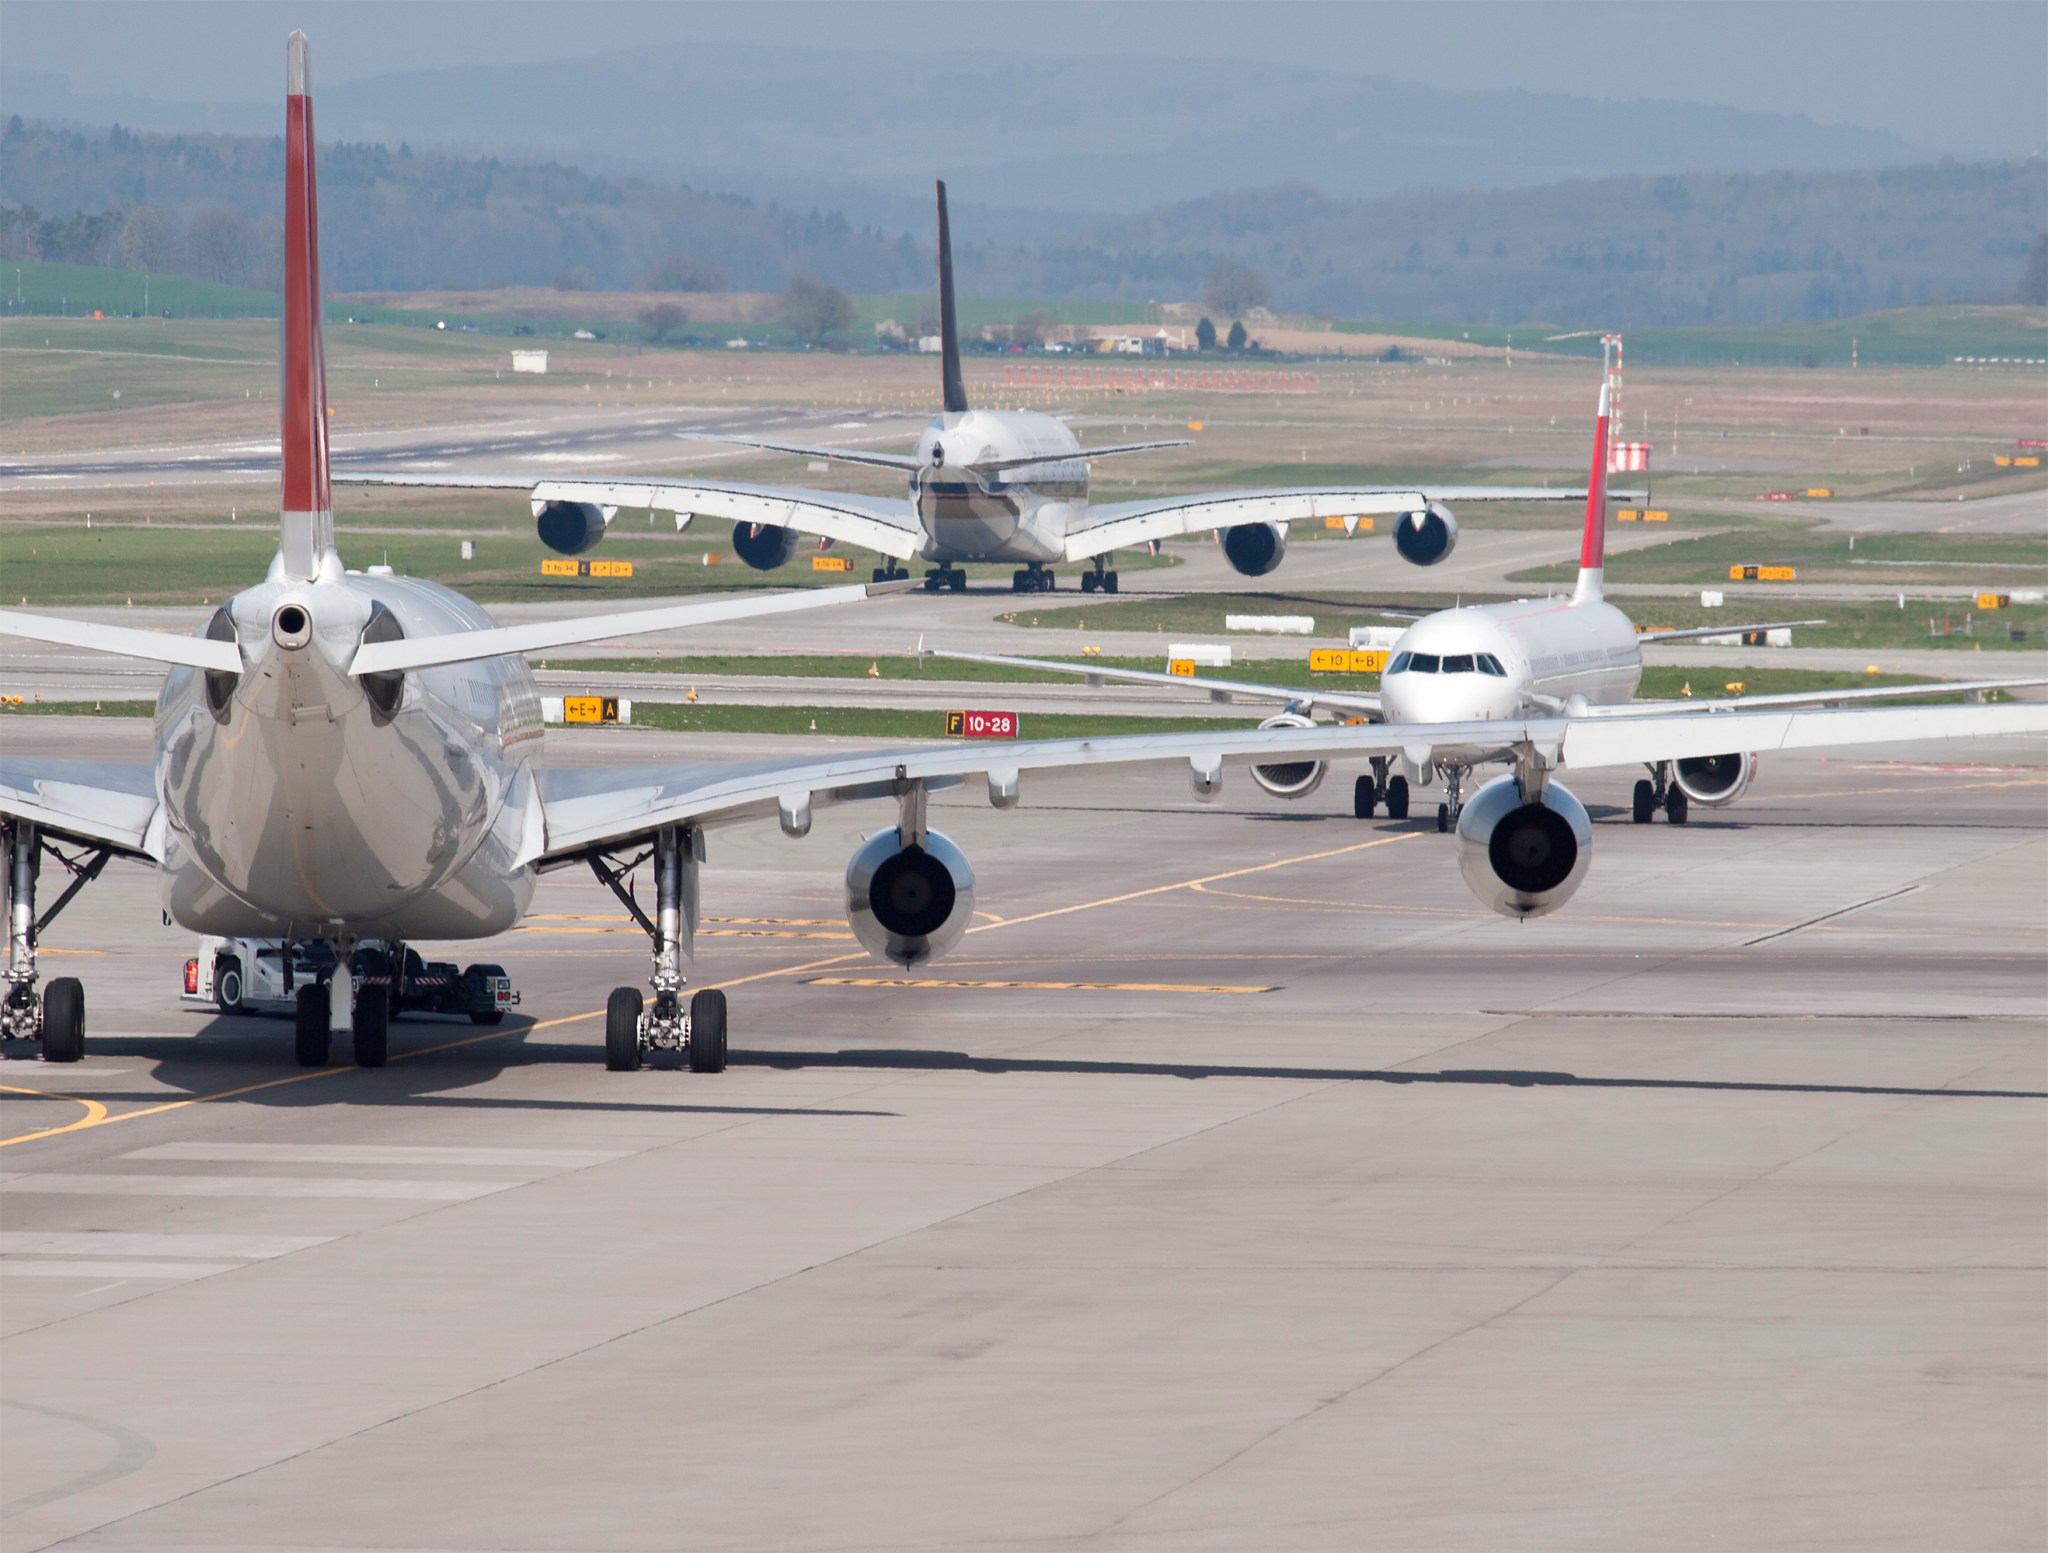 Three commercial jets taxiing on the runway.